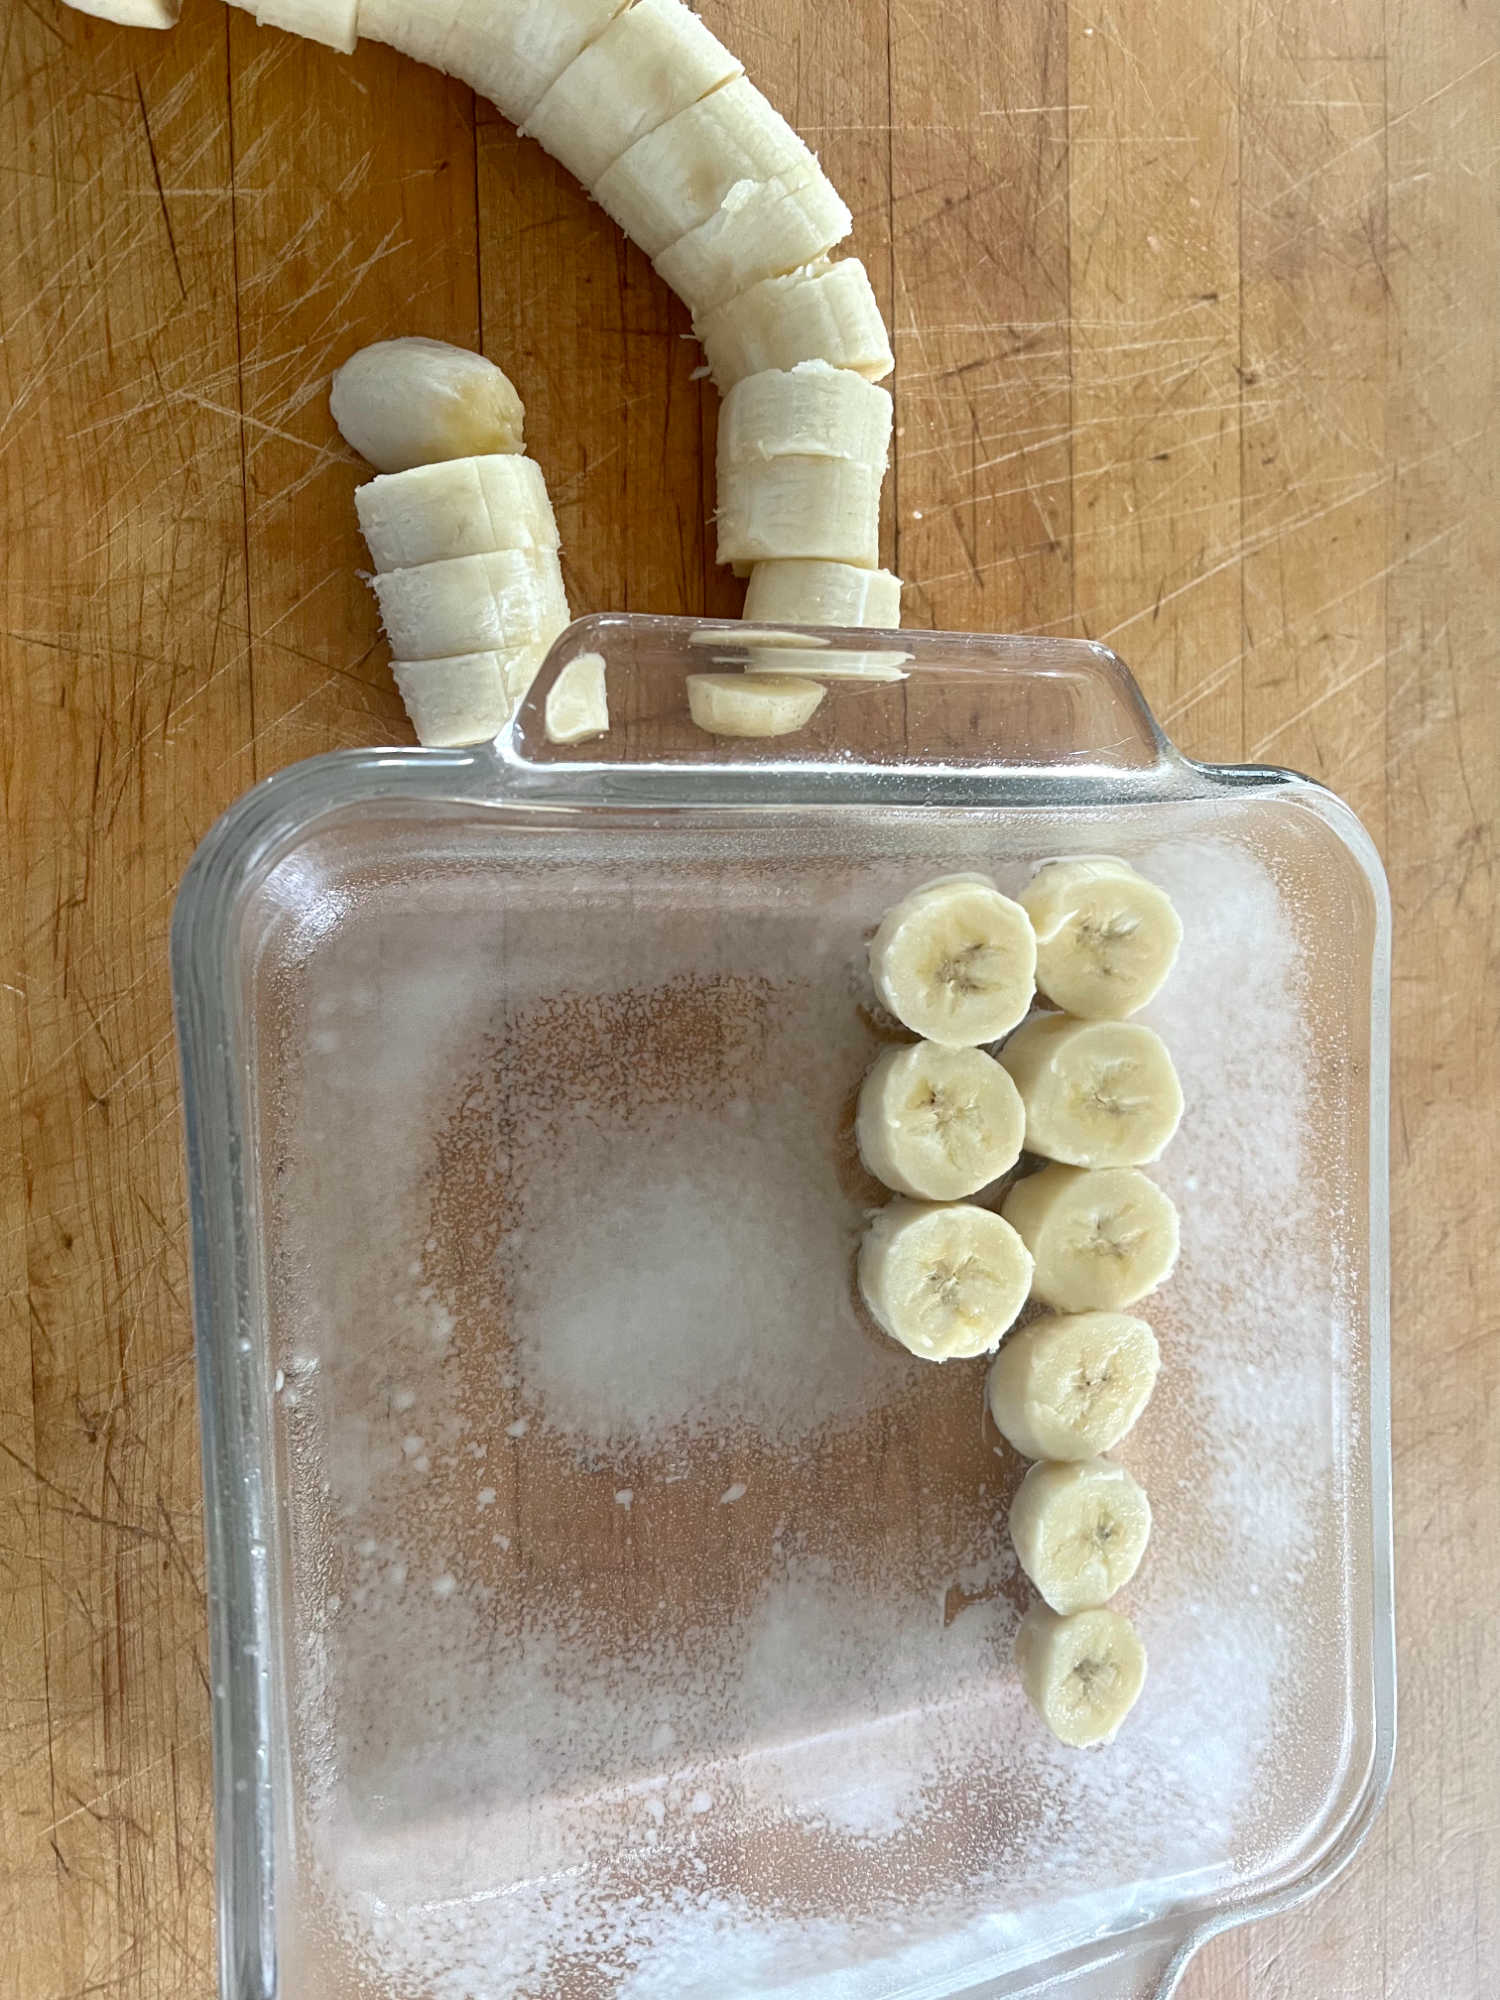 sliced bananas in the bottom of a baking dish